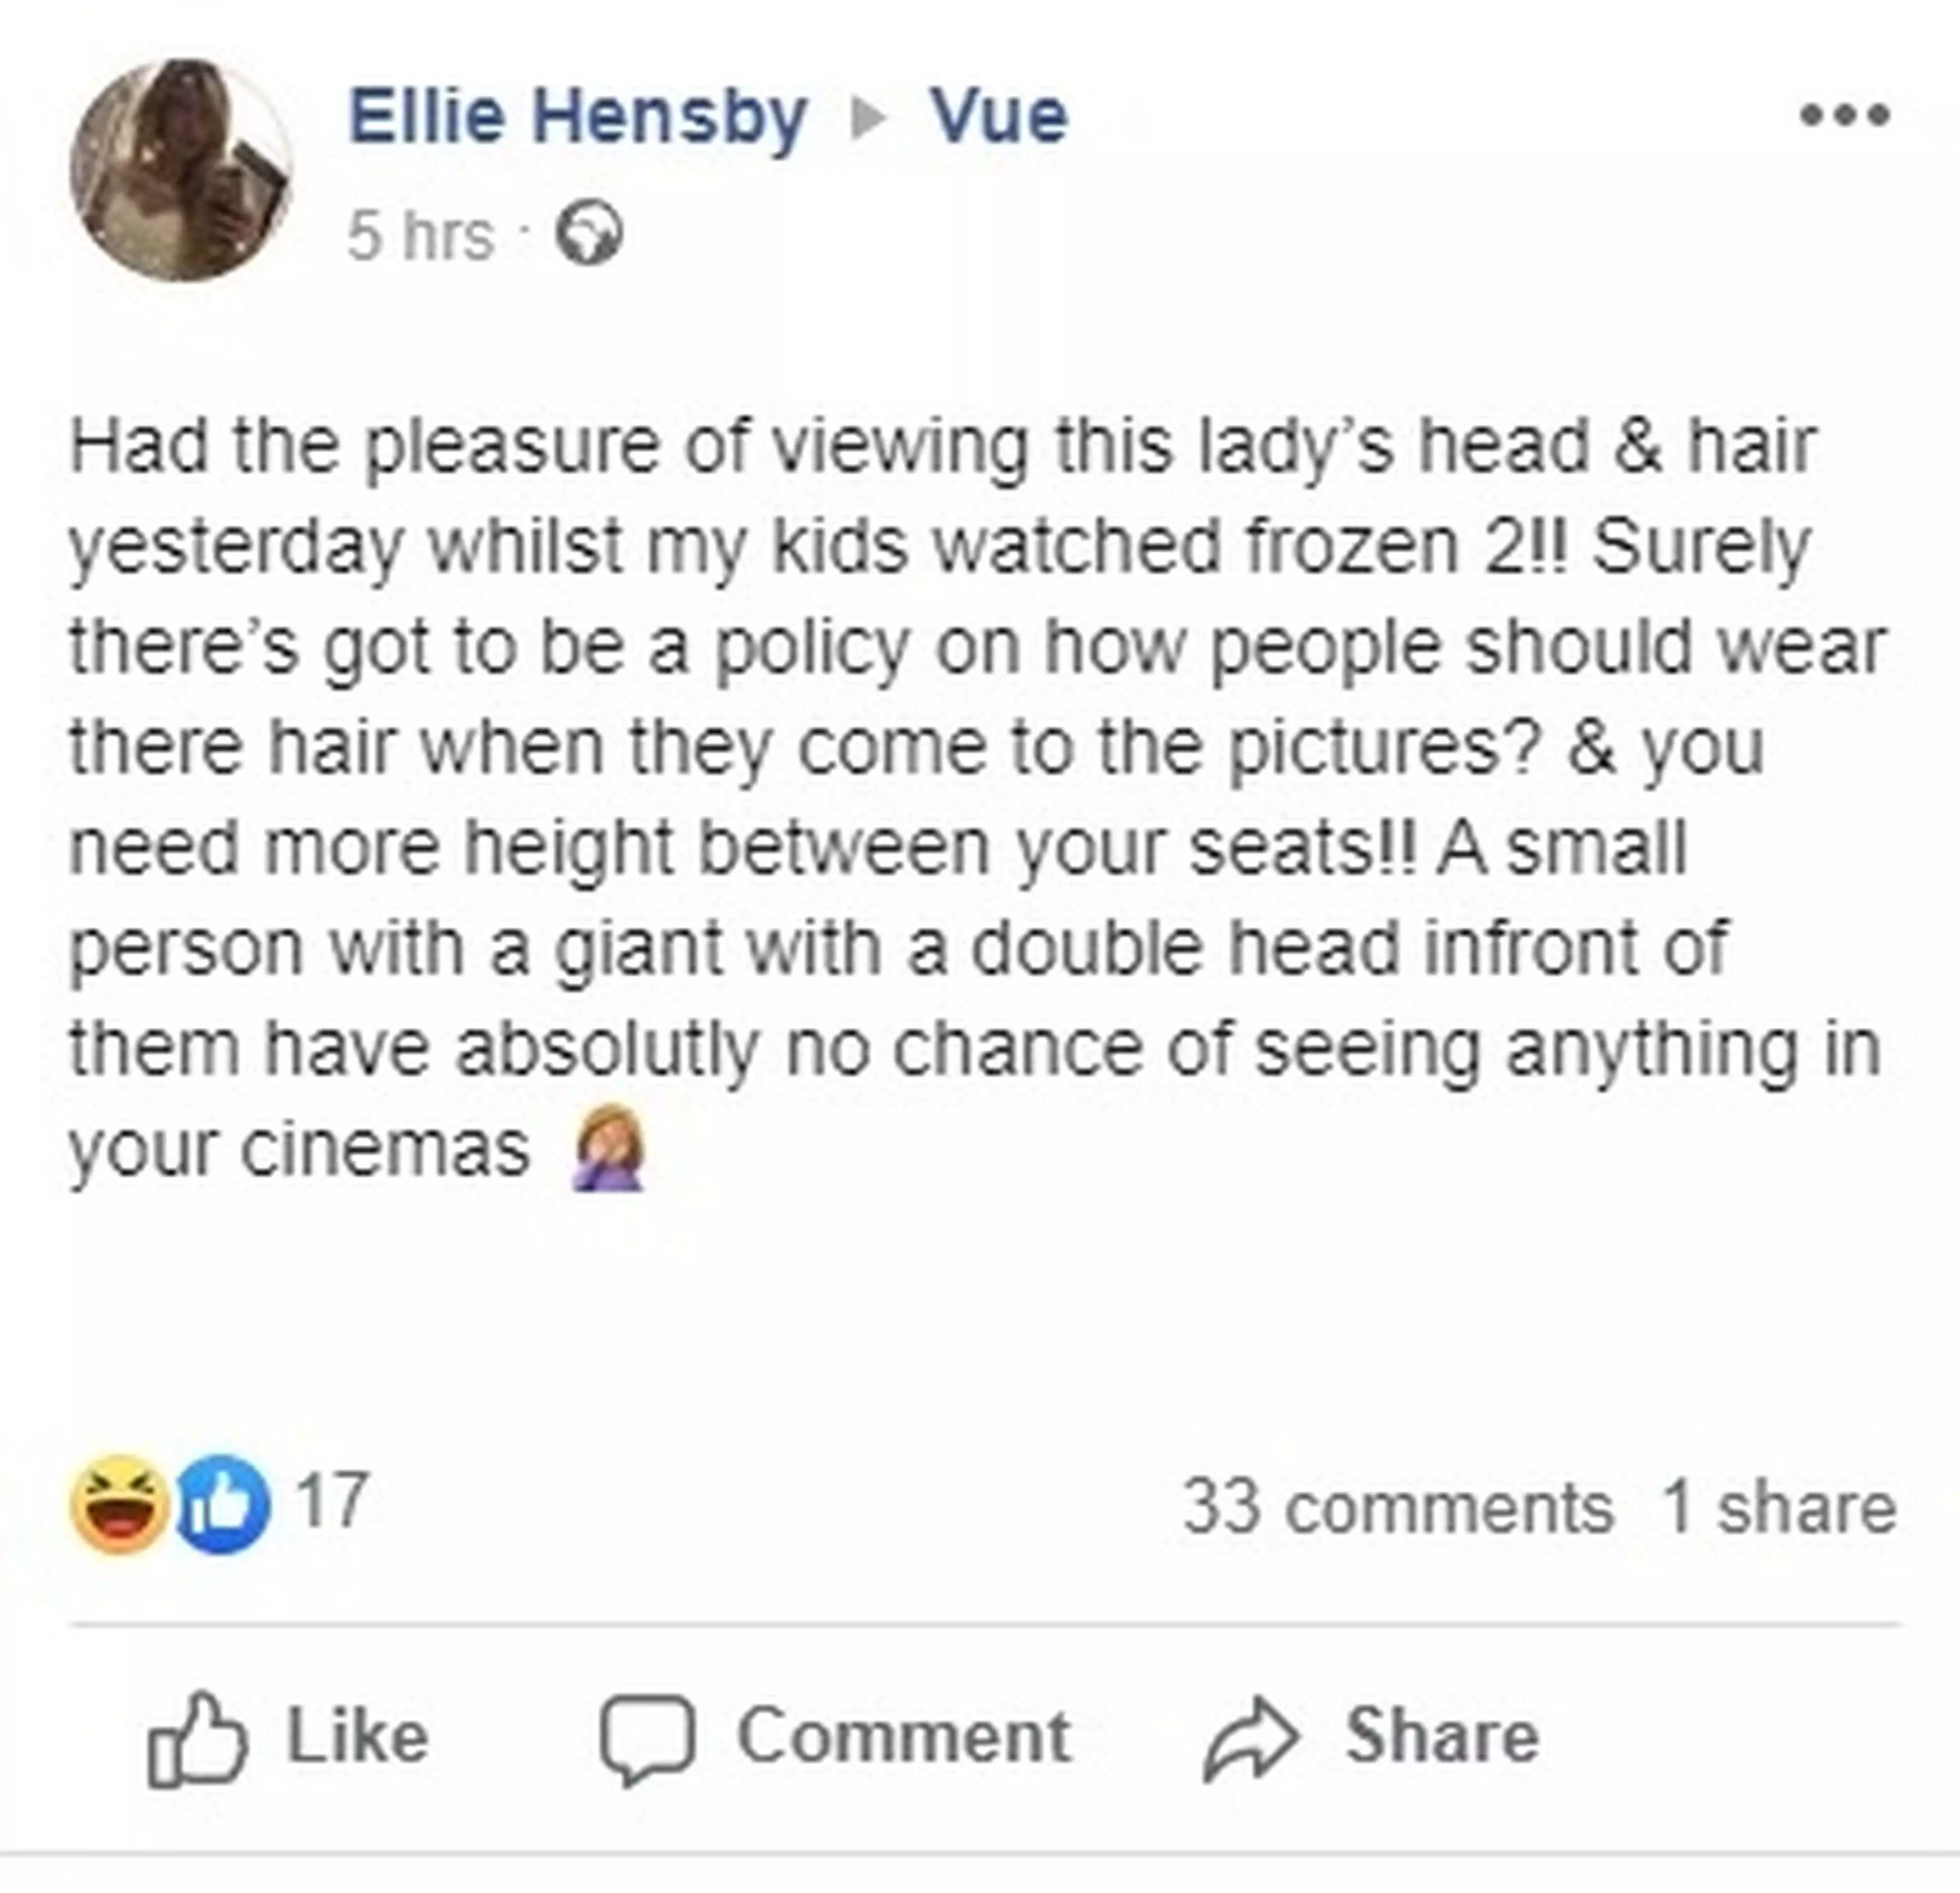 She took to social media to complain about the woman's hair.